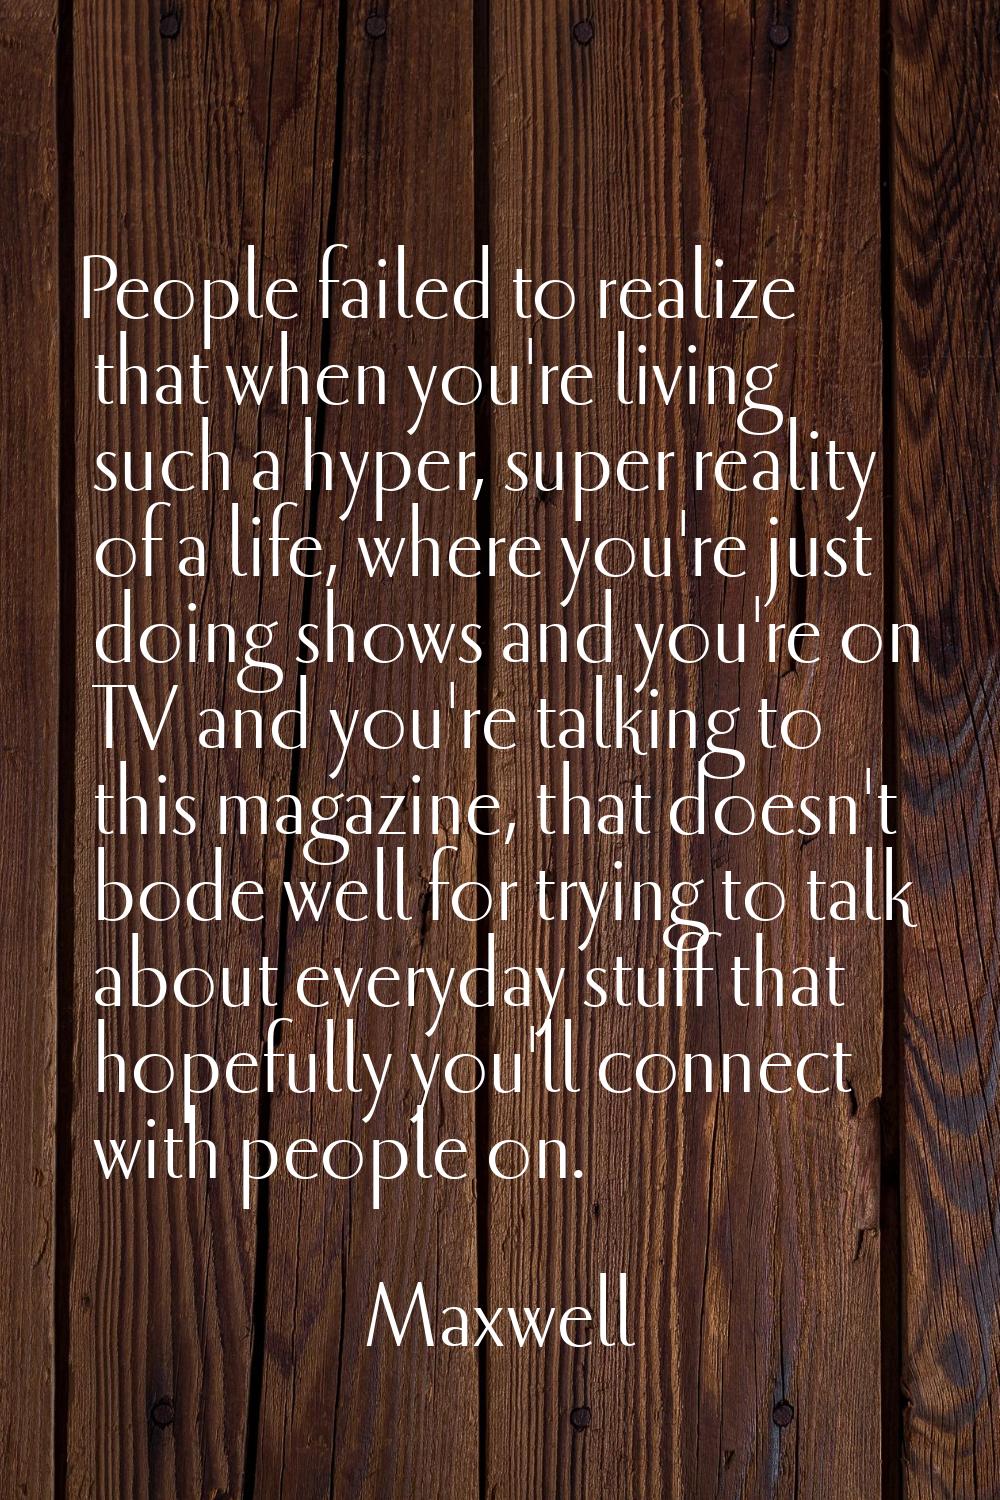 People failed to realize that when you're living such a hyper, super reality of a life, where you'r